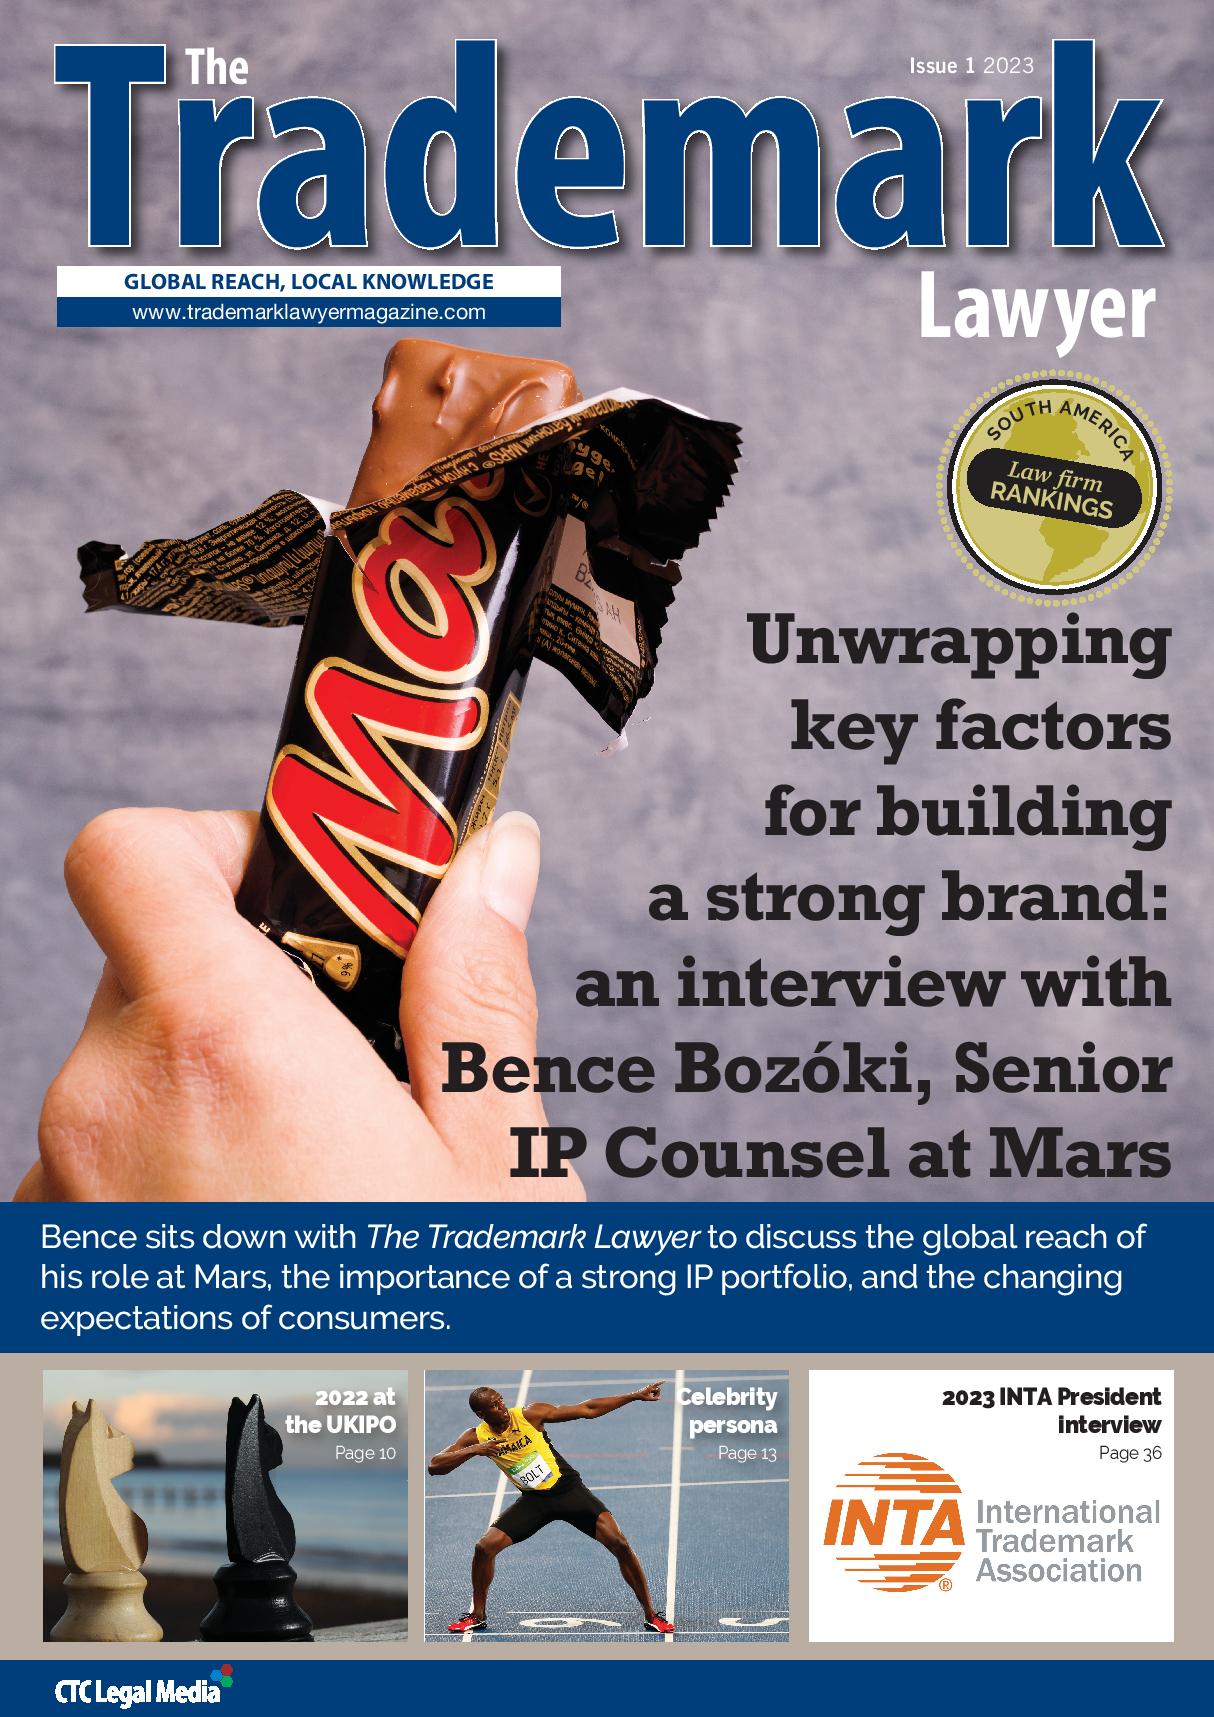 The Trademark Lawyer Issue 1, 2023